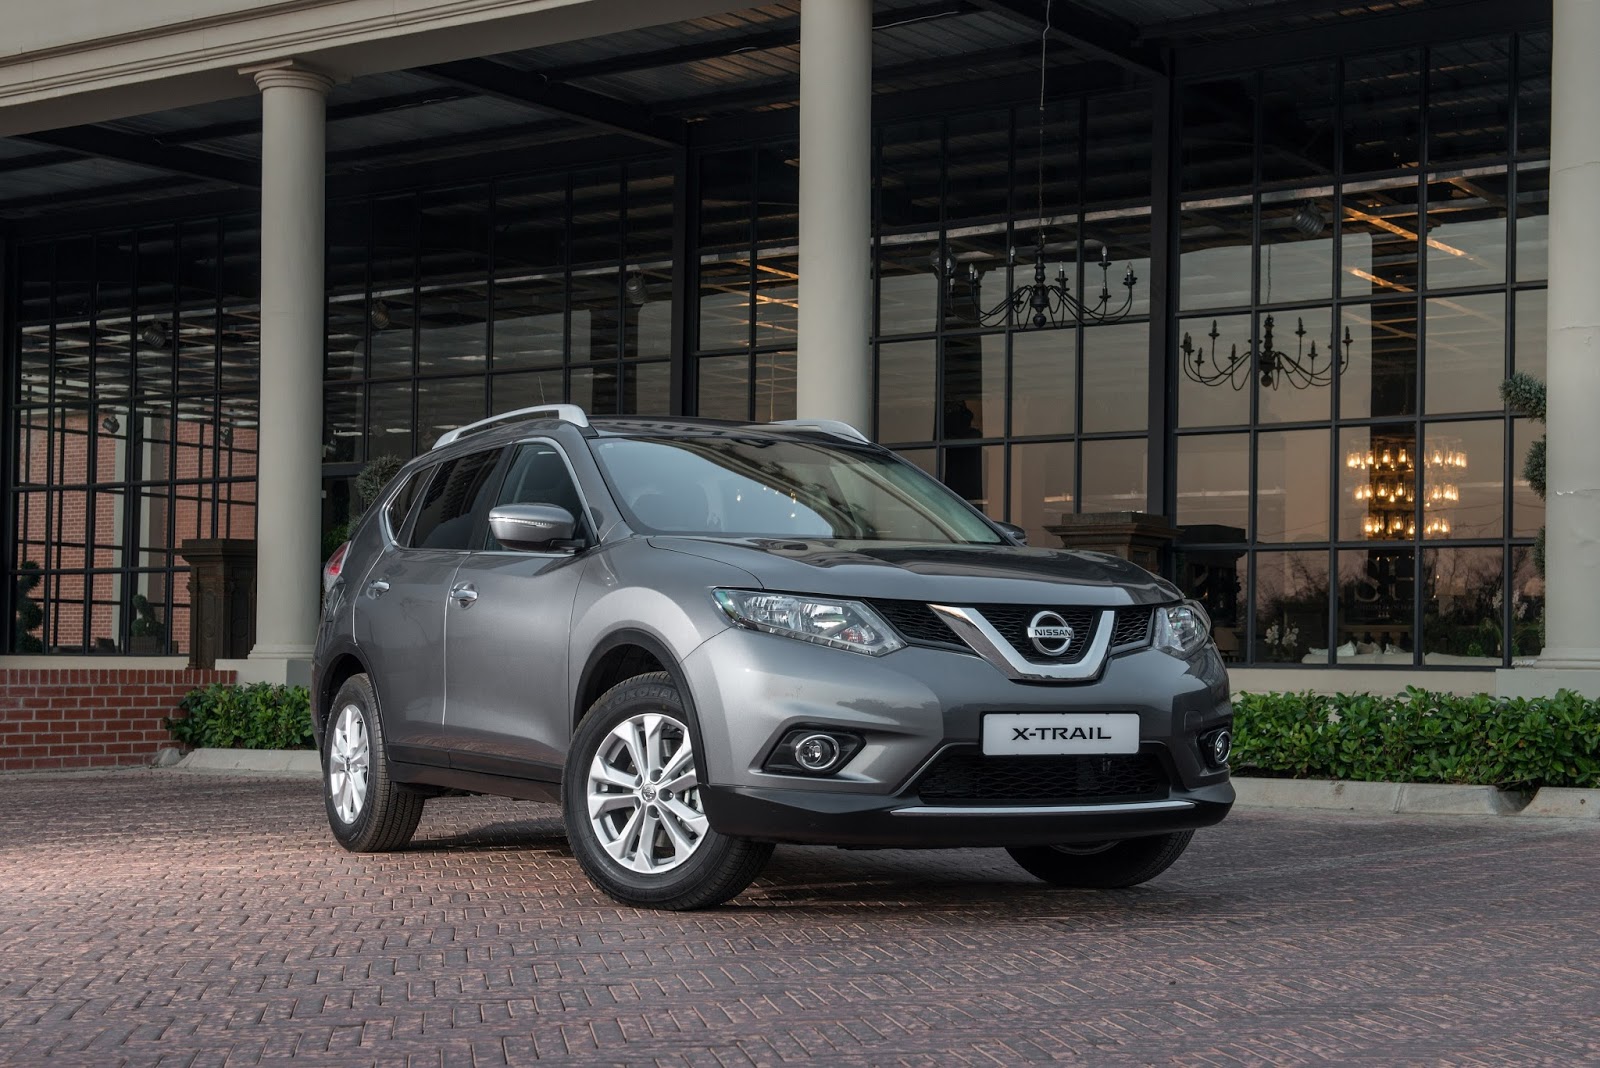 The Nissan X-TRAIL is the most loved SUV in the world !